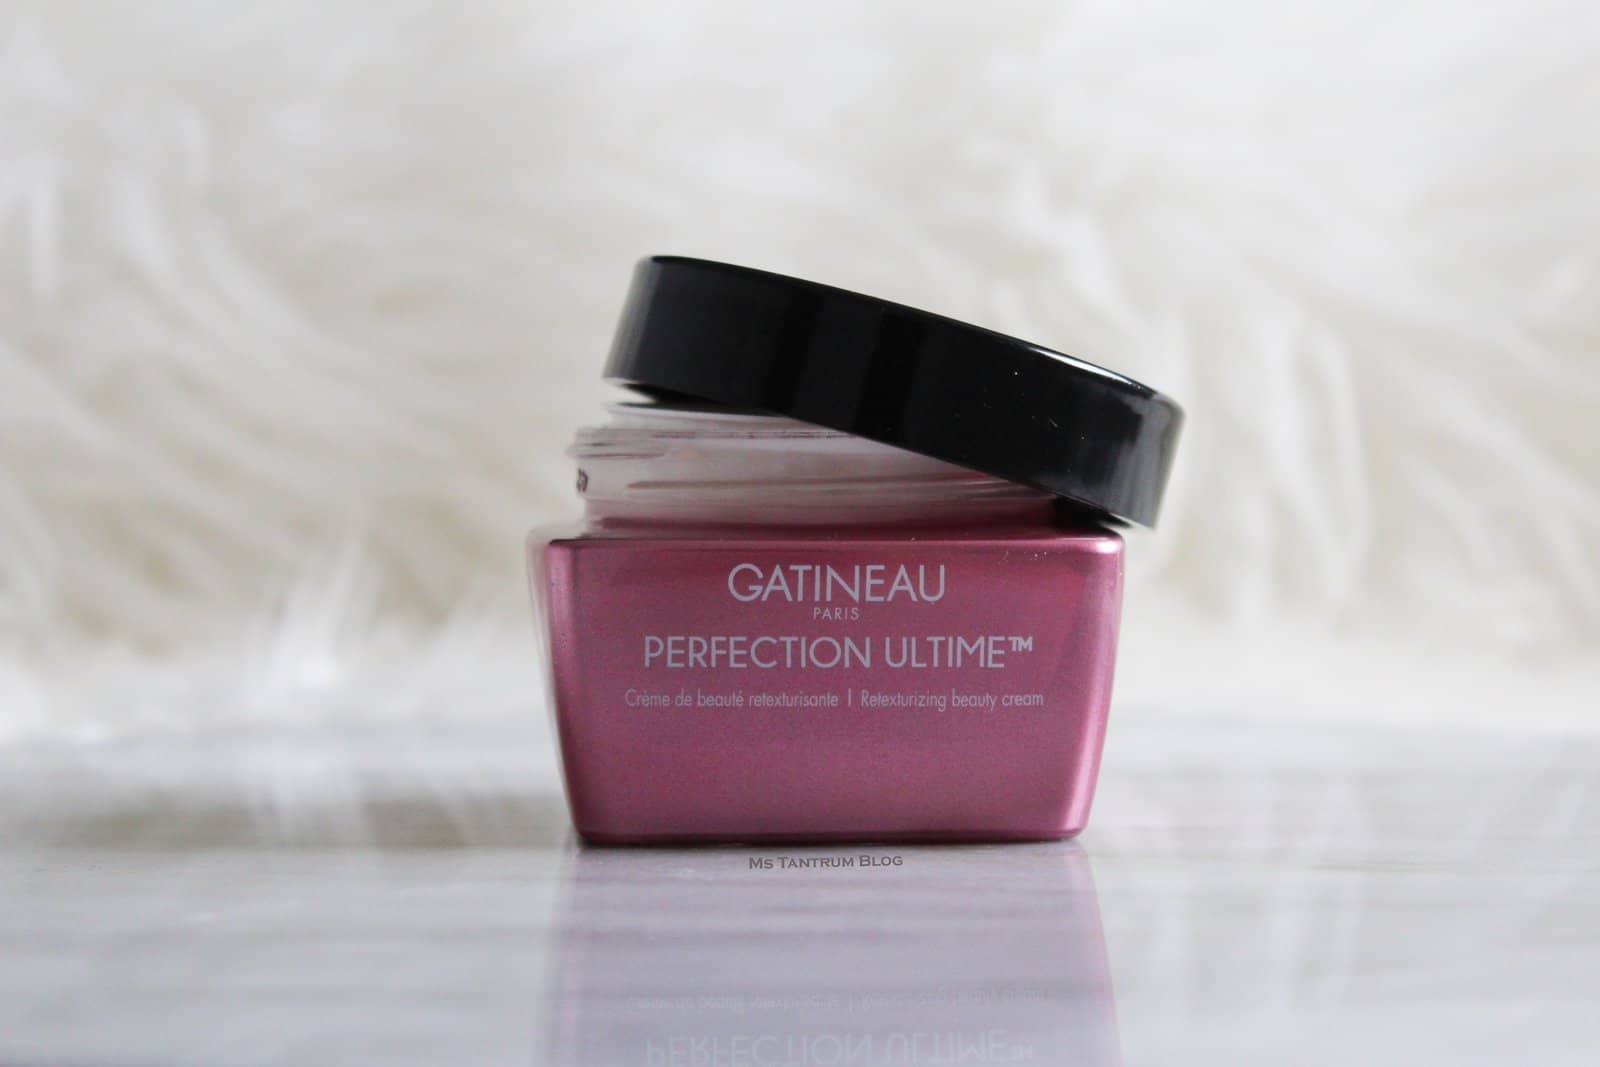 Gatineau Perfection Ultime Retexturizing Beauty Cream Review 